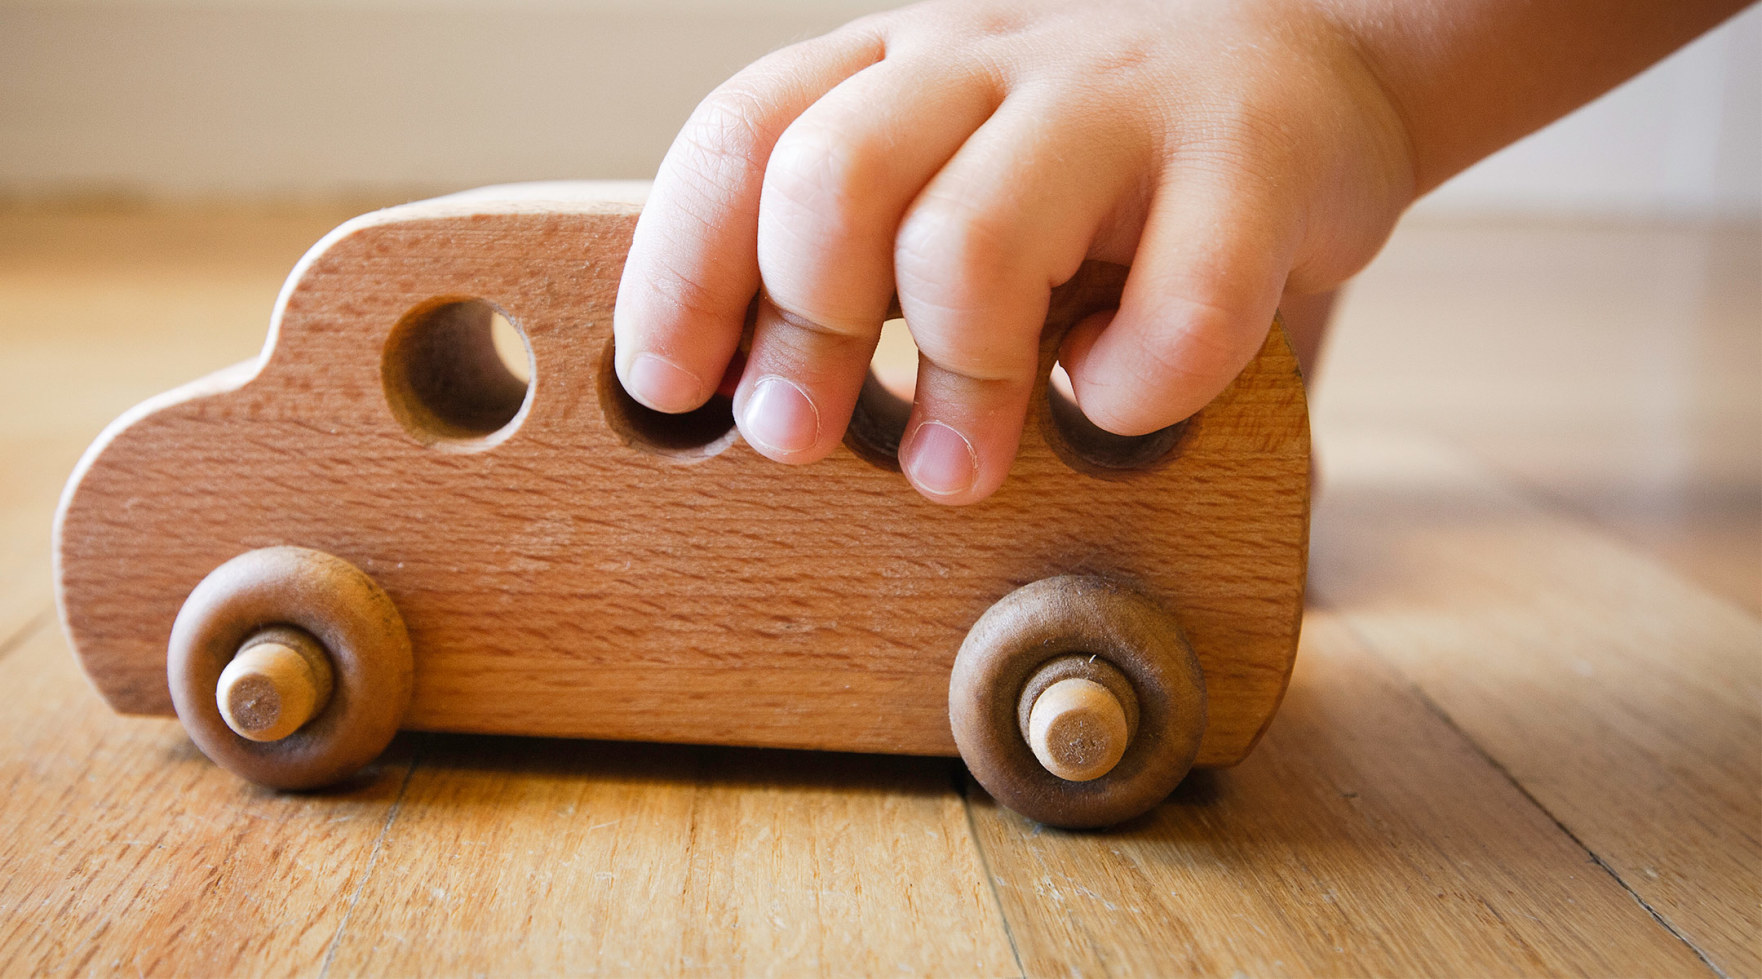 10 GORGEOUS WOODEN HANDMADE TOYS FOR TODDLERS